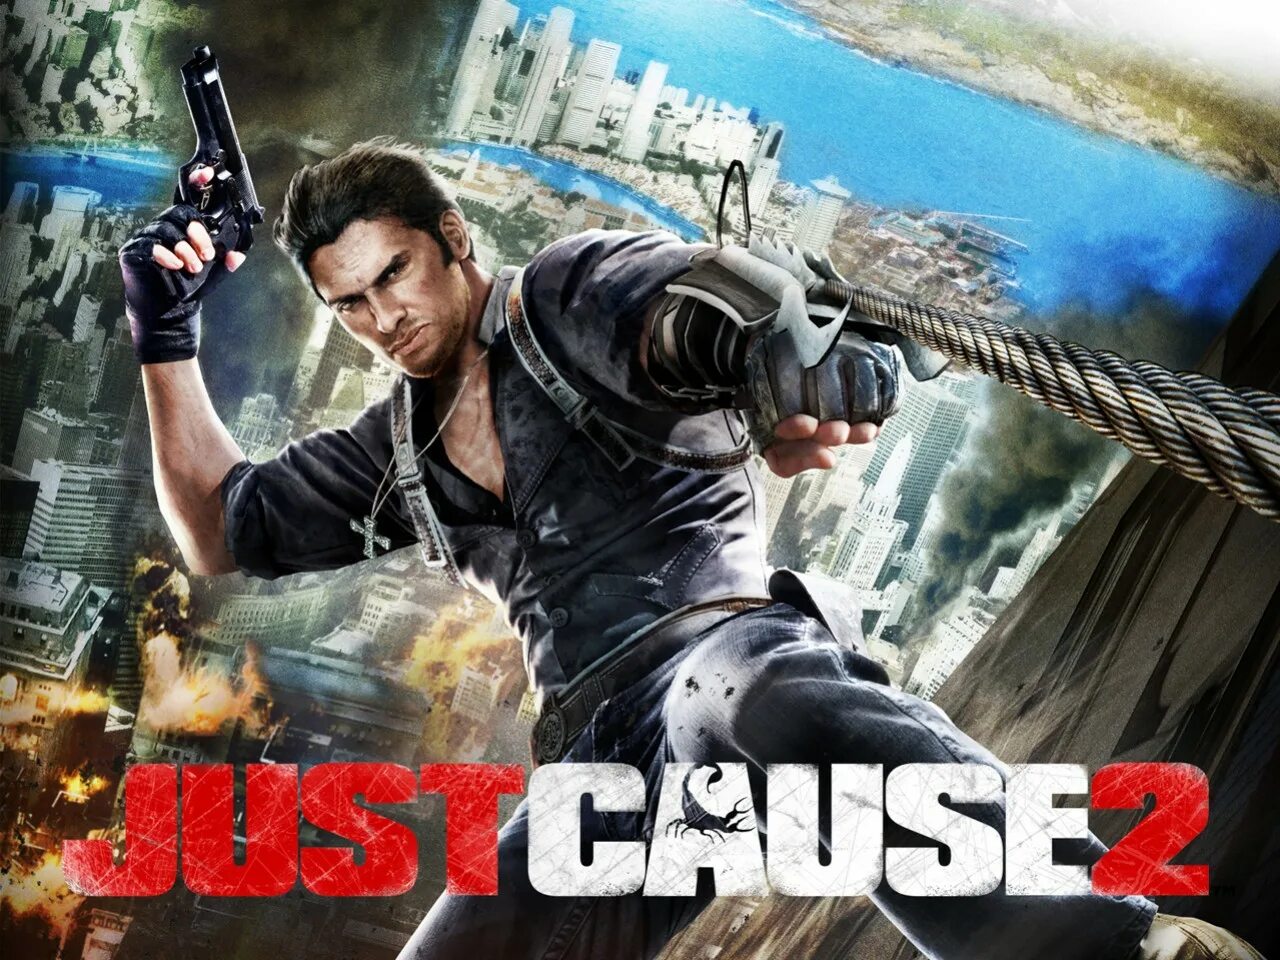 Рико Родригес just cause 2. Игра just cause 2. Just cause 2 Скорпион. Just cause 2 ps3 Gameplay.